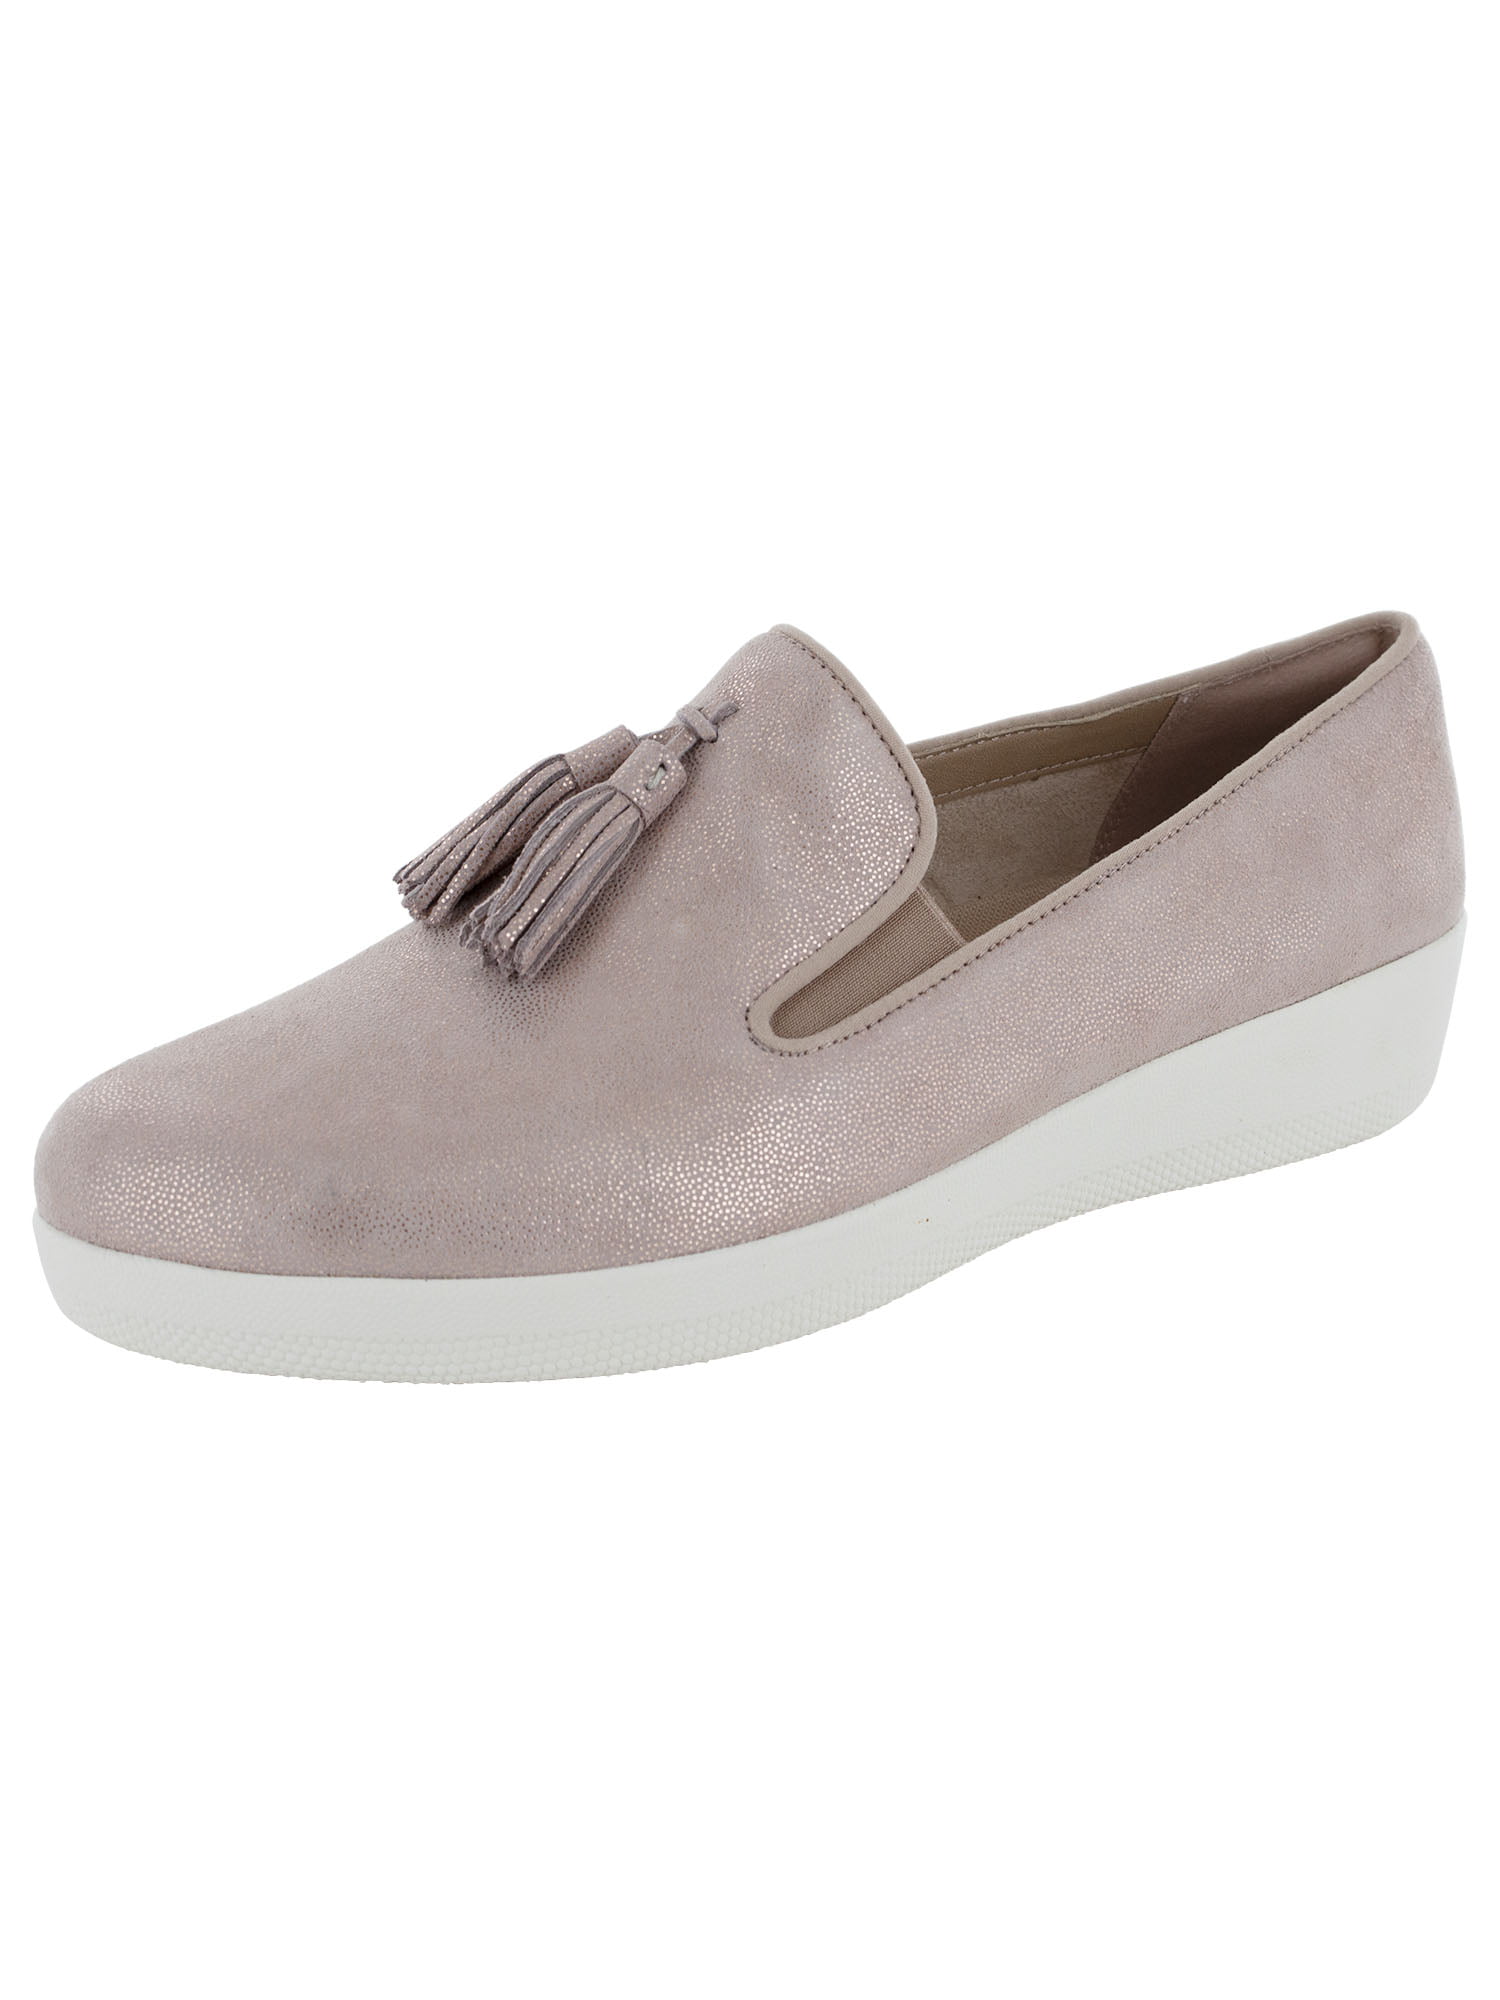 FitFlop - Fitflop Womens Tassel Superskate Shimmery Loafer Shoes ...